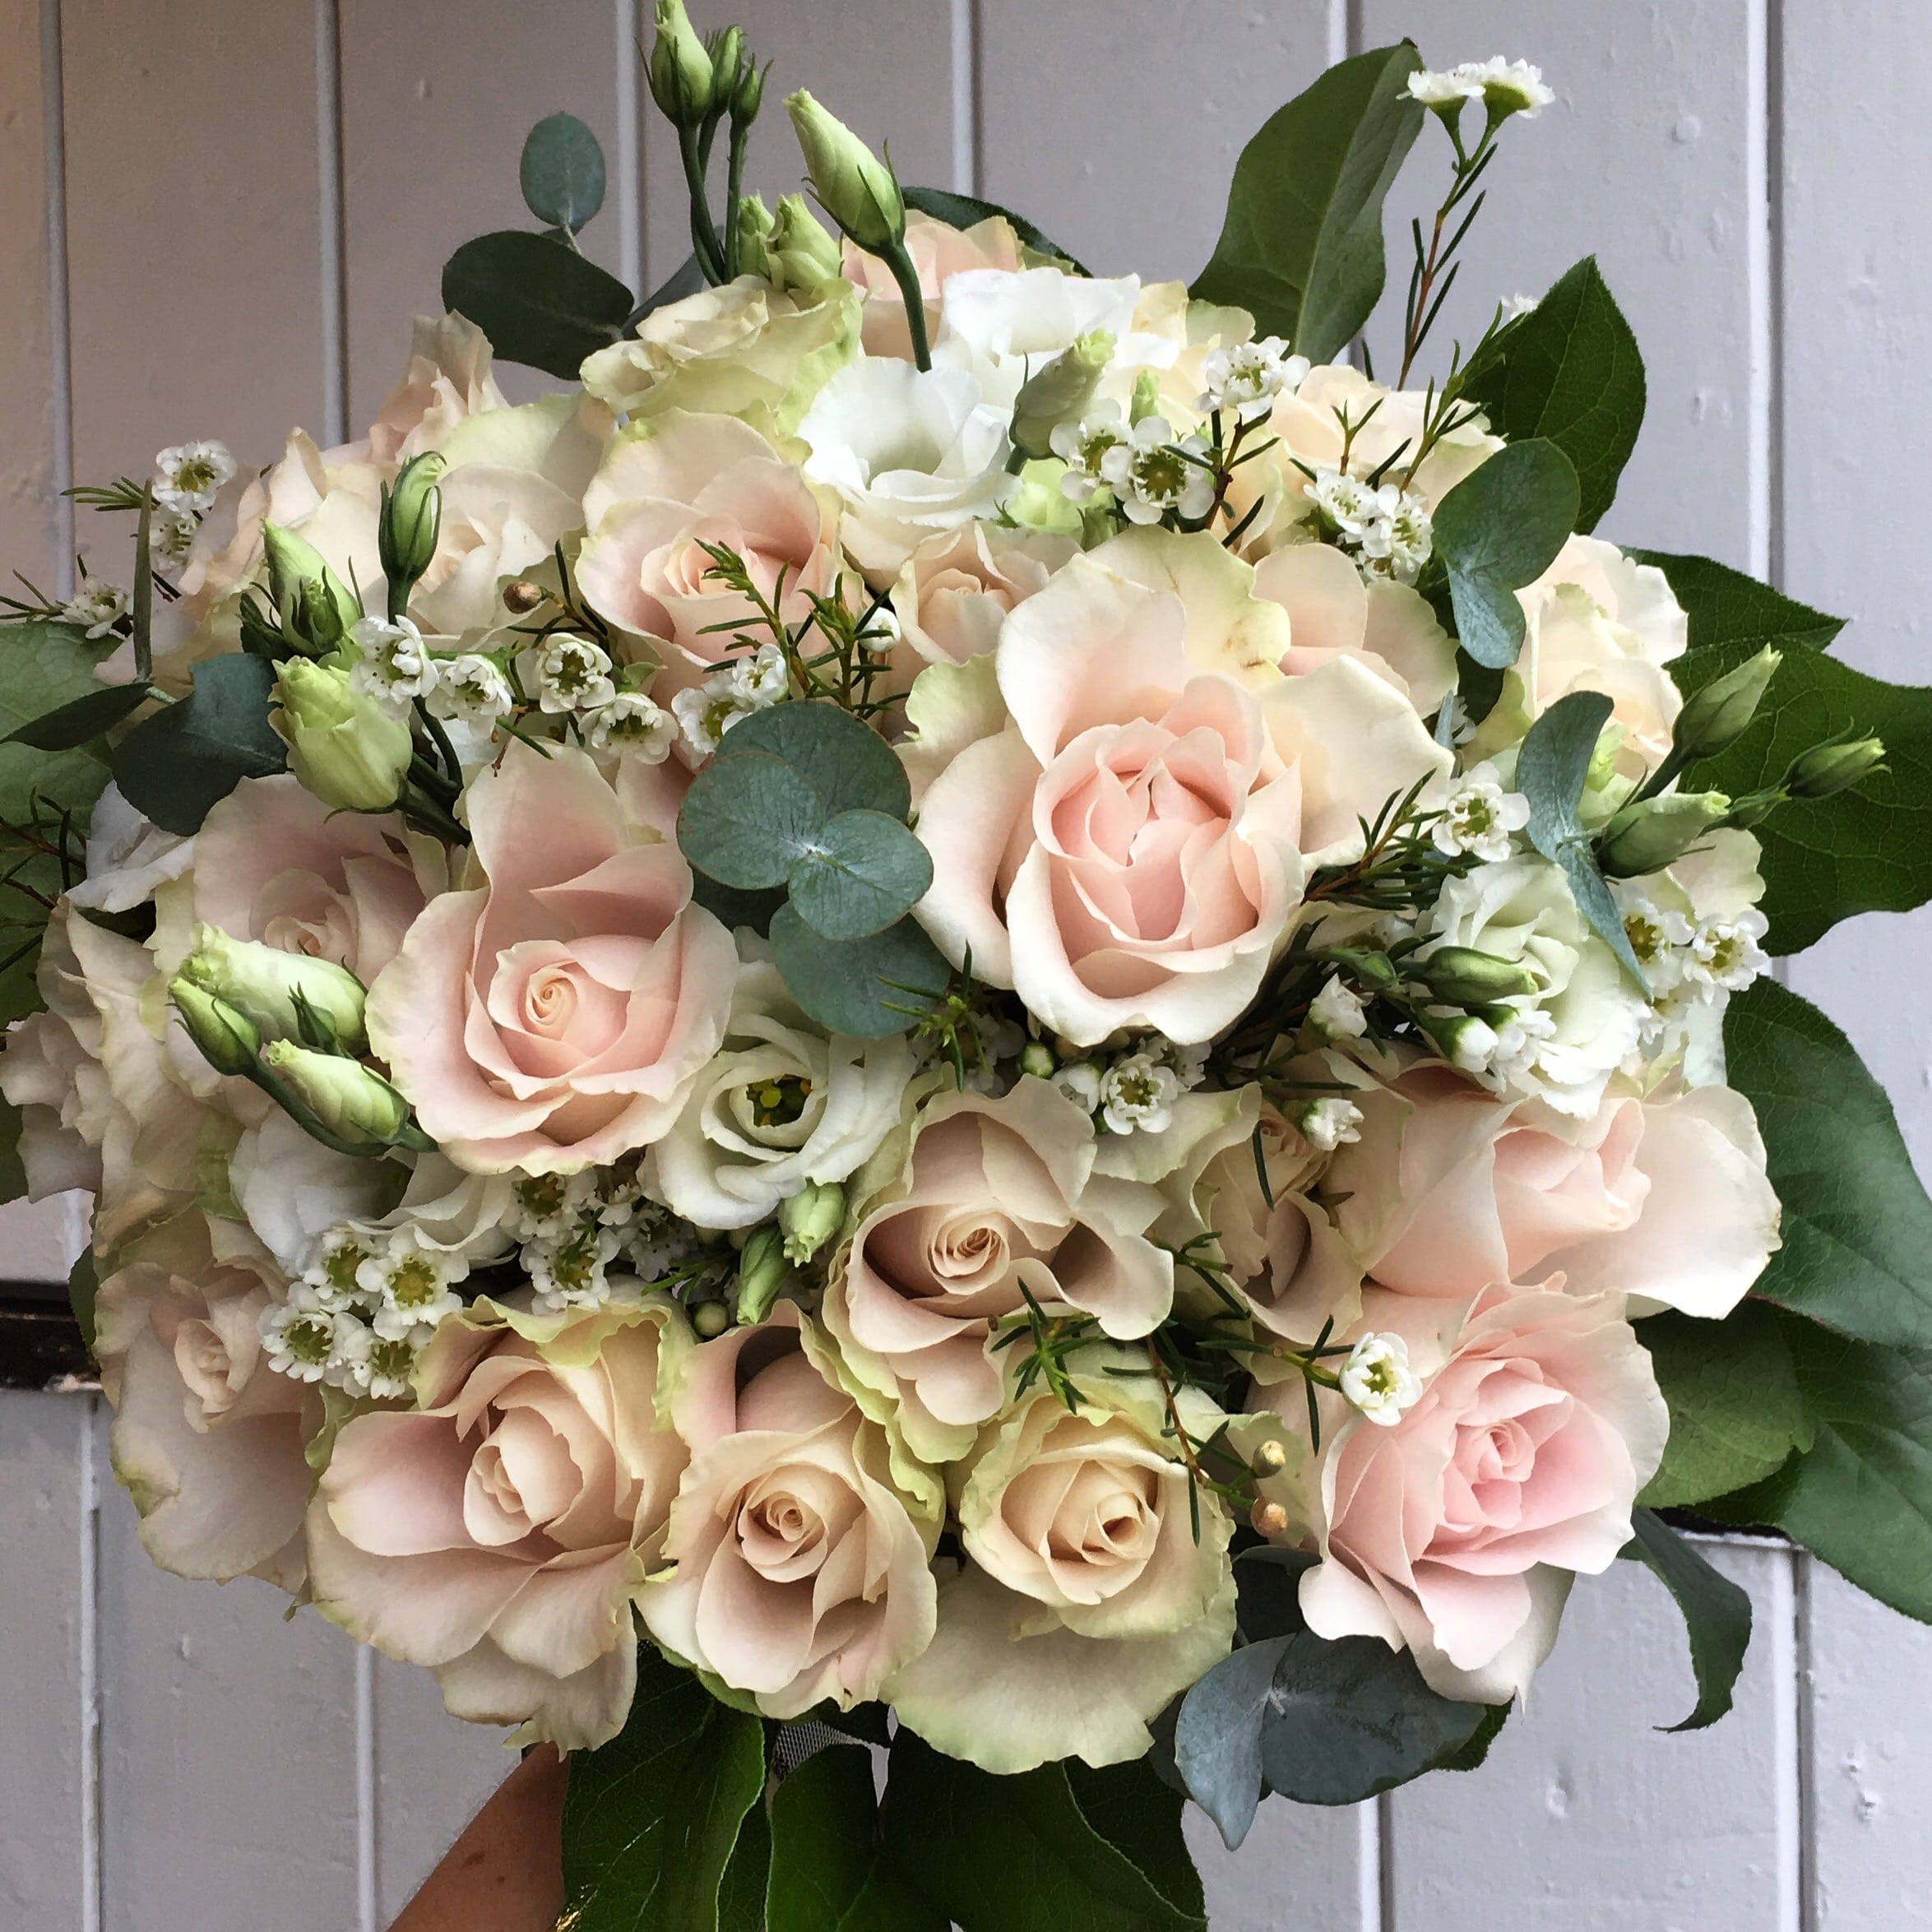 bridal bouquet filled with blush pink avalanche roses, waxflower, lisianthus and eucalyptus